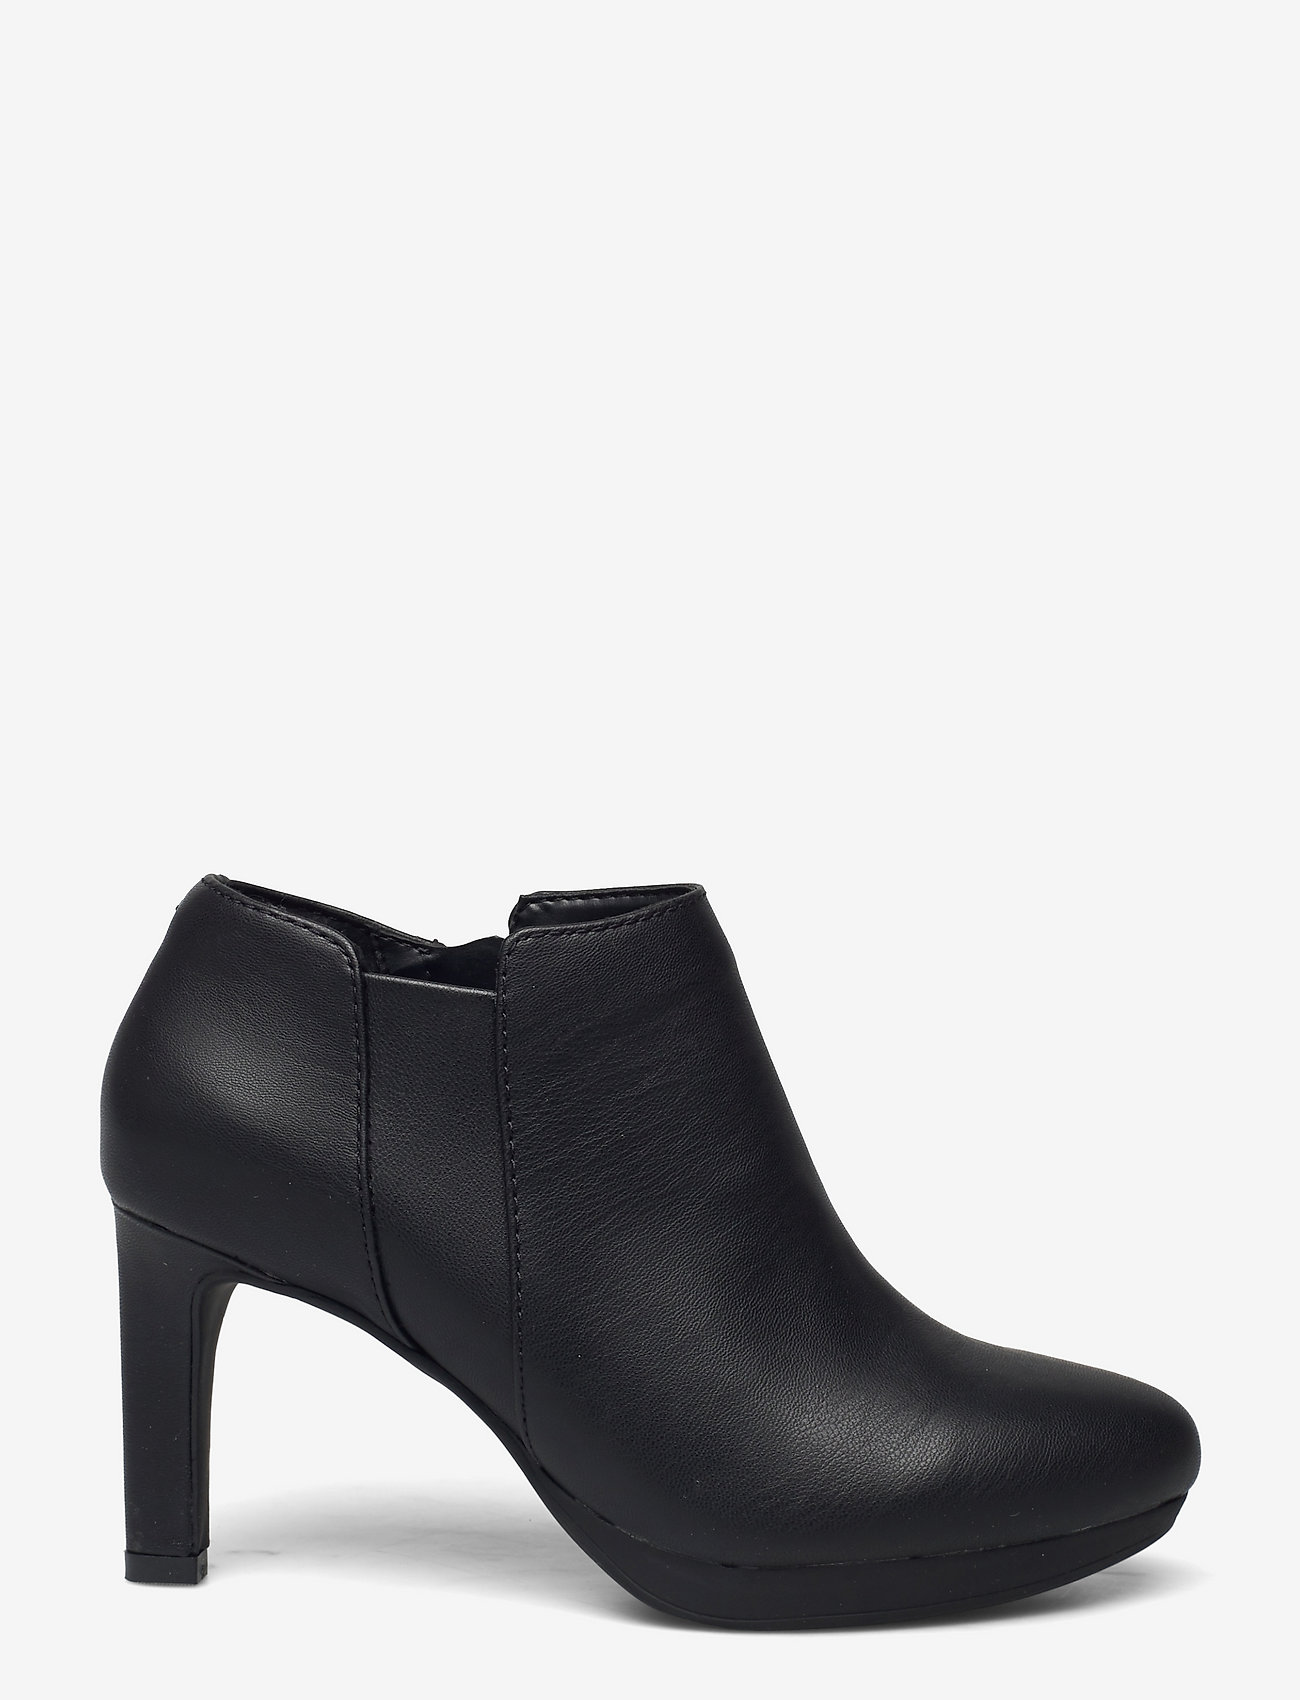 Clarks Ambyr Step - Heeled ankle boots | Boozt.com